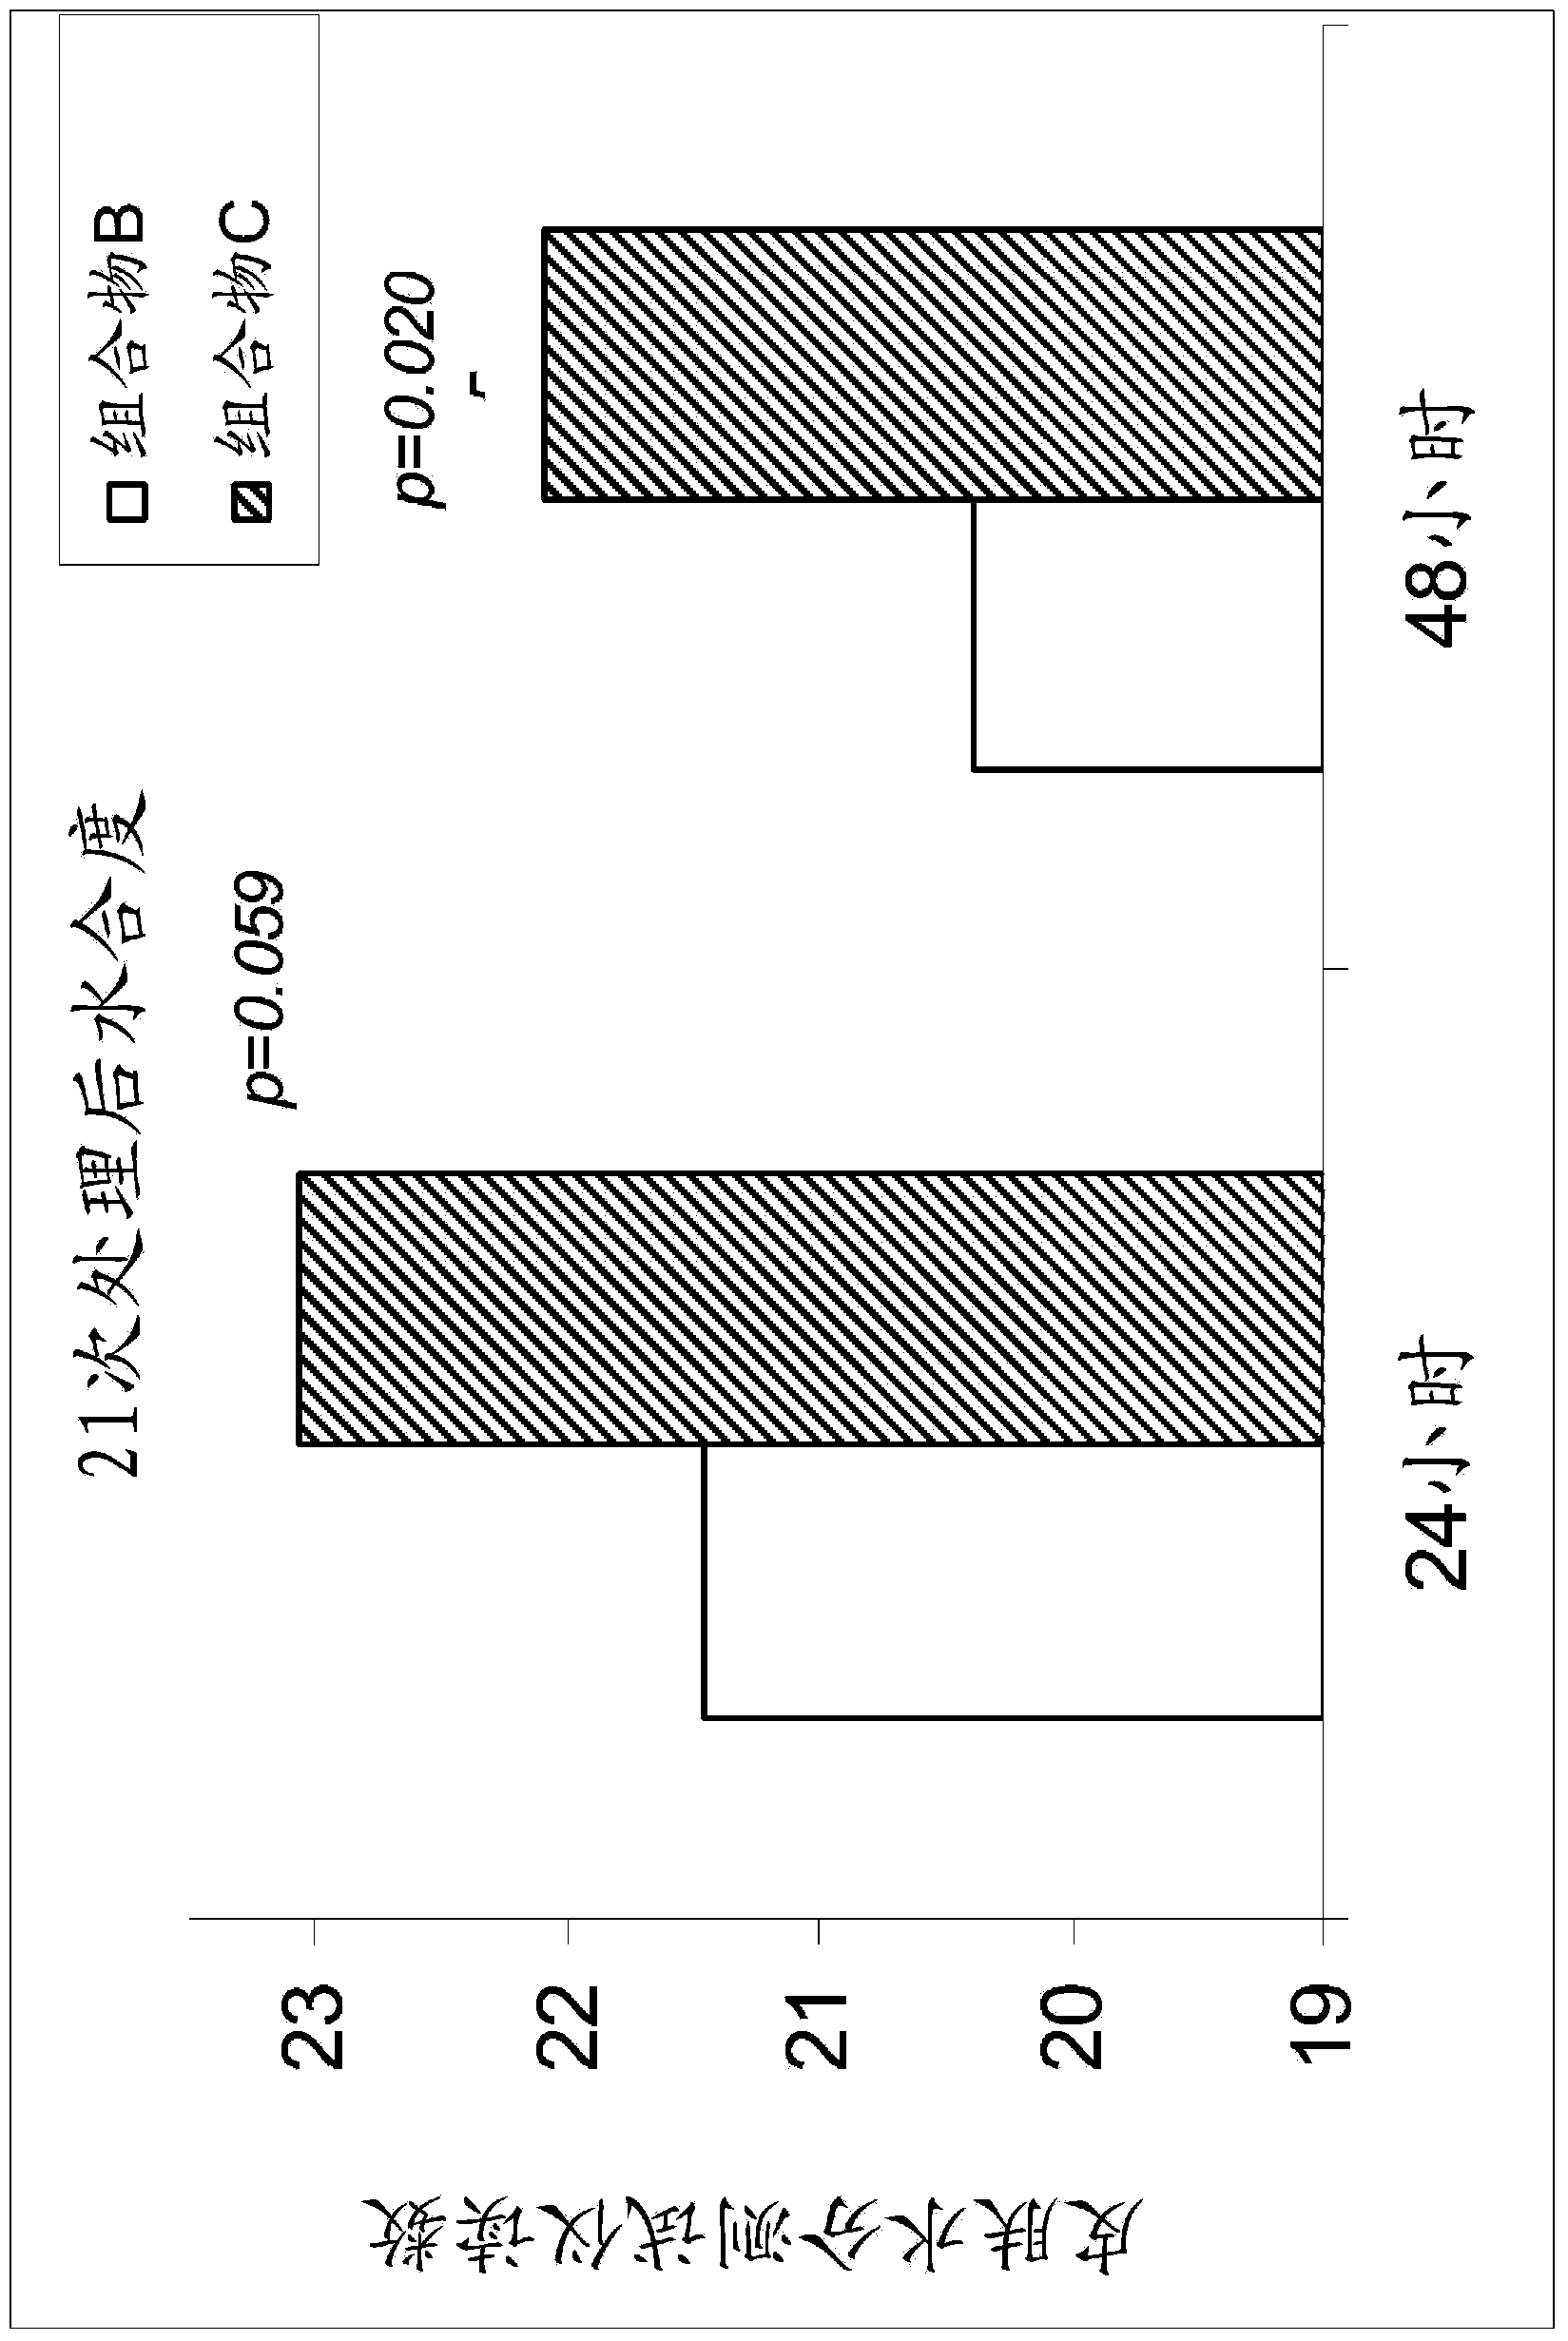 Methods of enhancing skin hydration and improving non-diseased skin